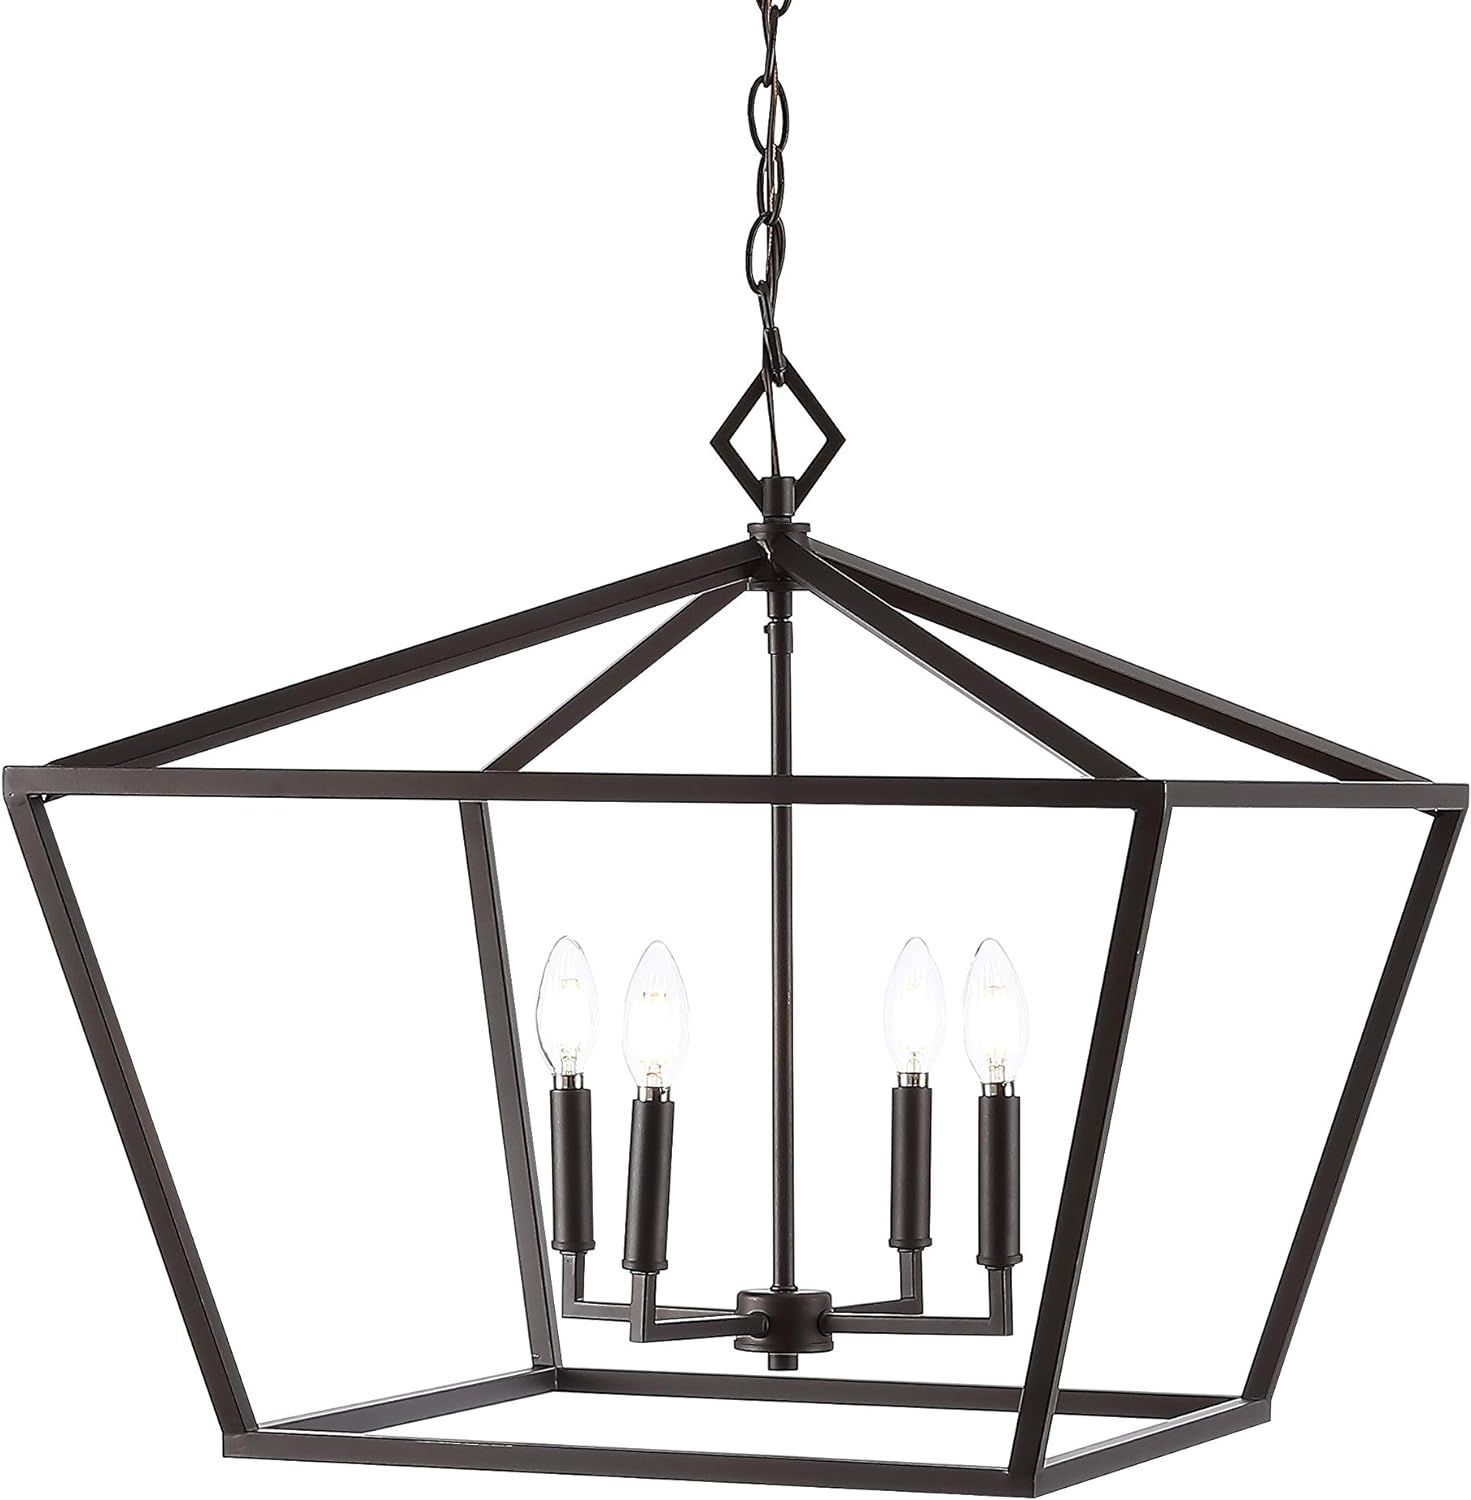 Gatsby Adjustable 98" Rustic Iron LED Lantern Pendant in Oil-Rubbed Bronze